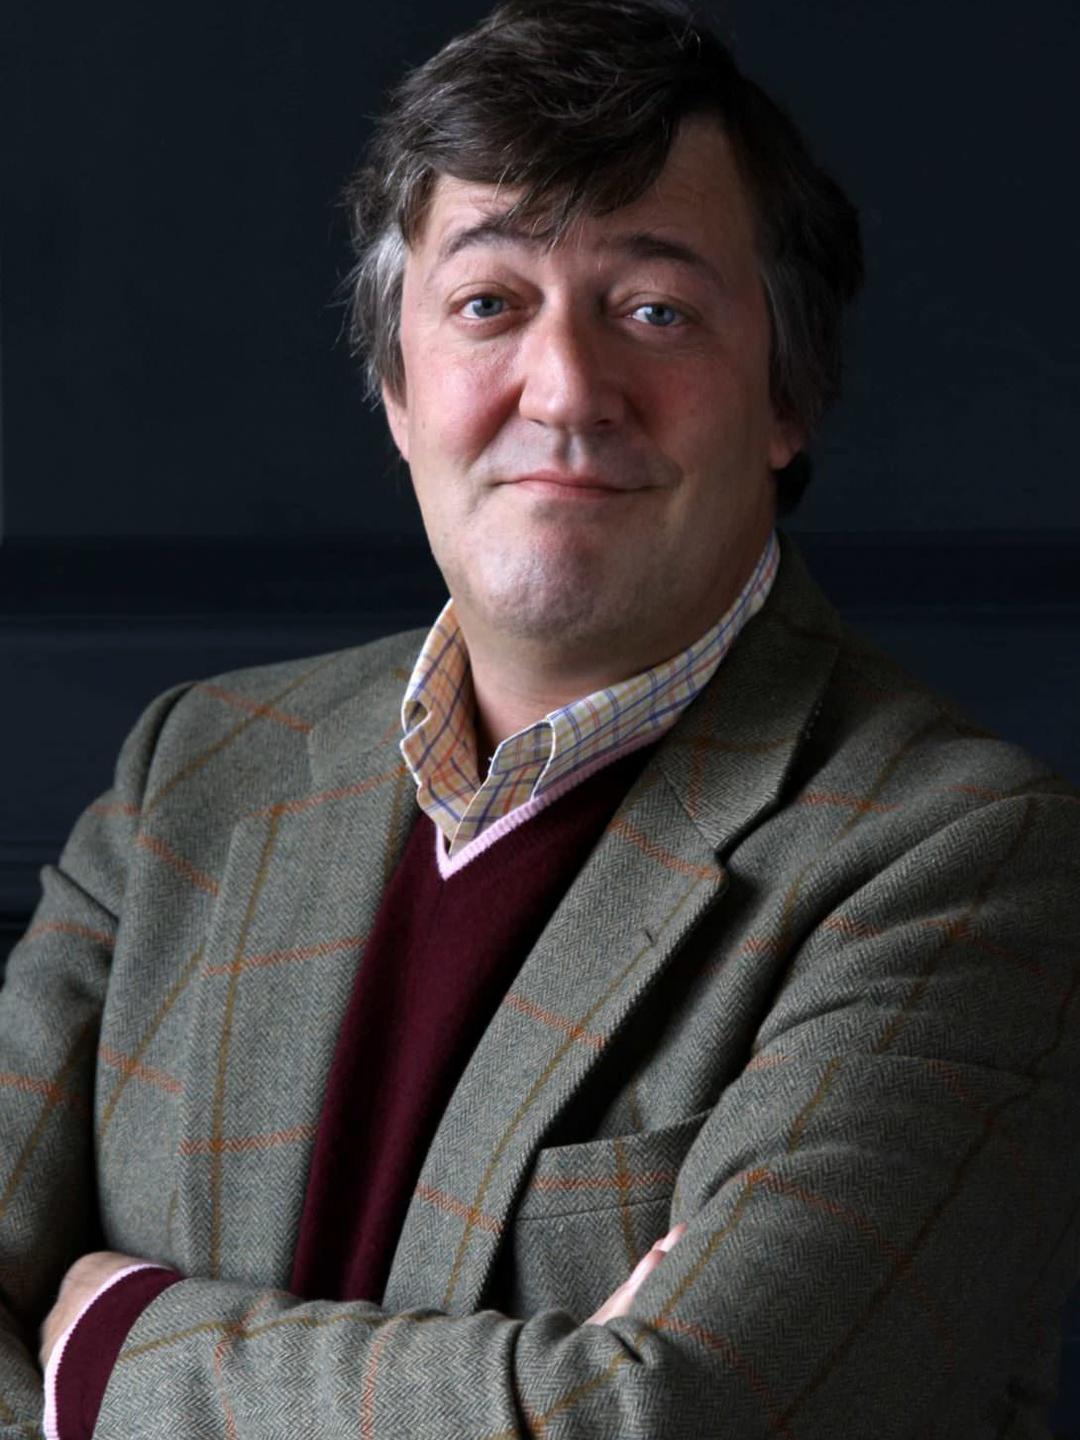 Stephen Fry who is his mother